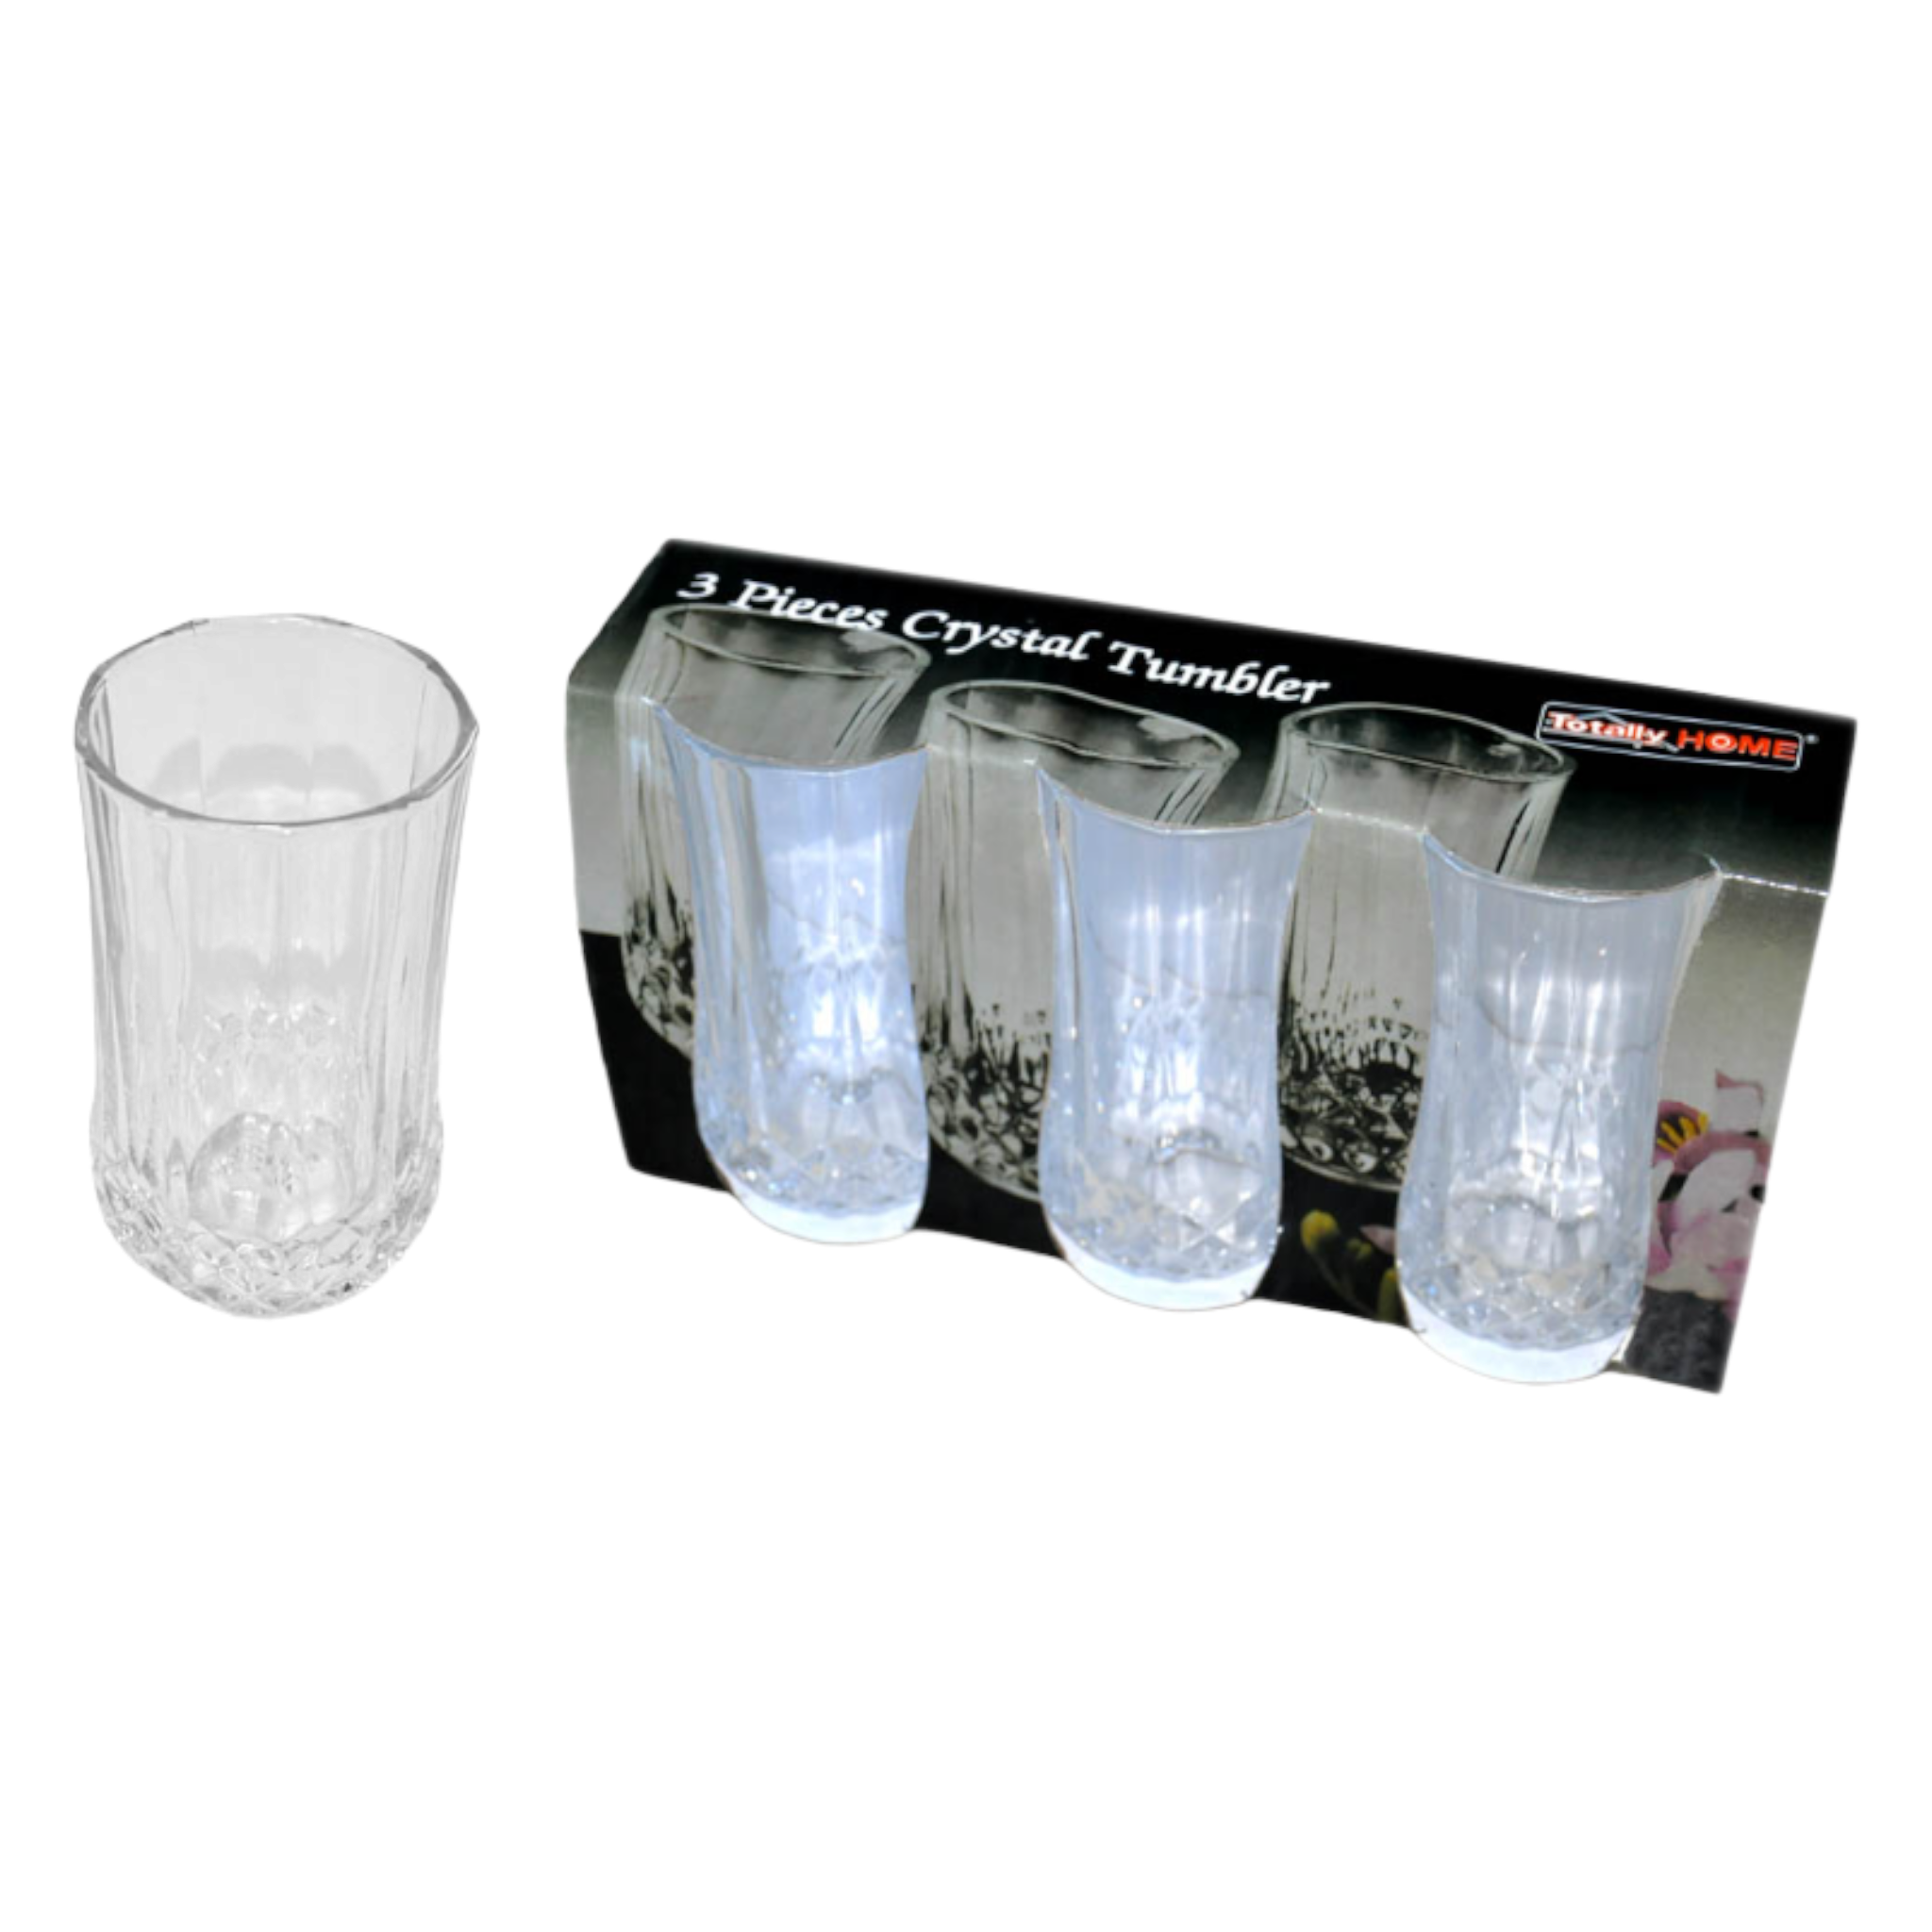 Totally Home Shot Glass Crystal Tot Measure 3pc TH70